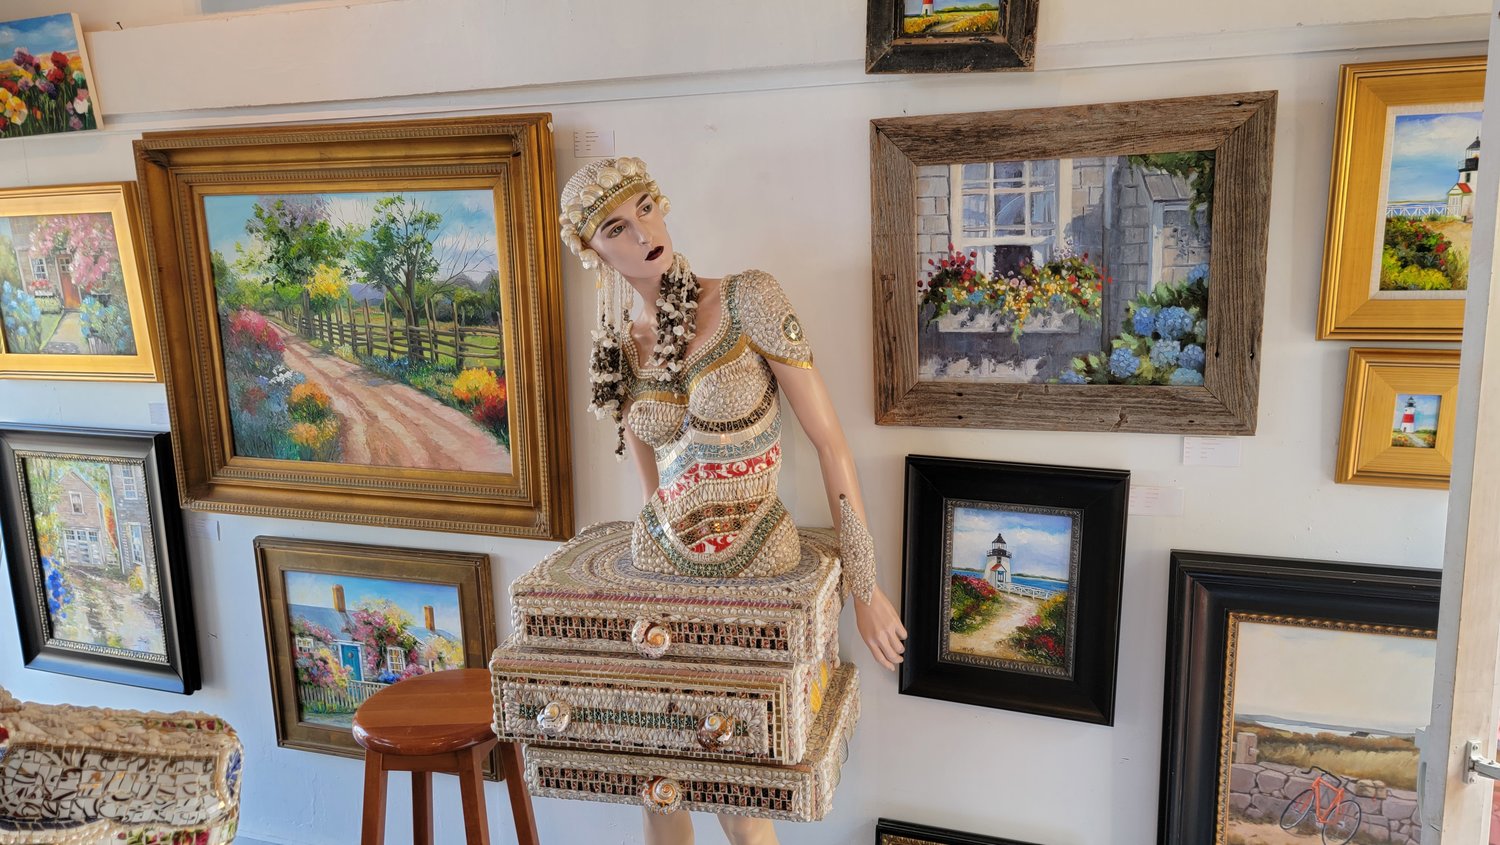 The Ireland Galleries are divided into two spaces: one for clothing, handbags and jewelry; the other for artwork, including Lorene Ireland’s paintings and signature mosaic pieces.